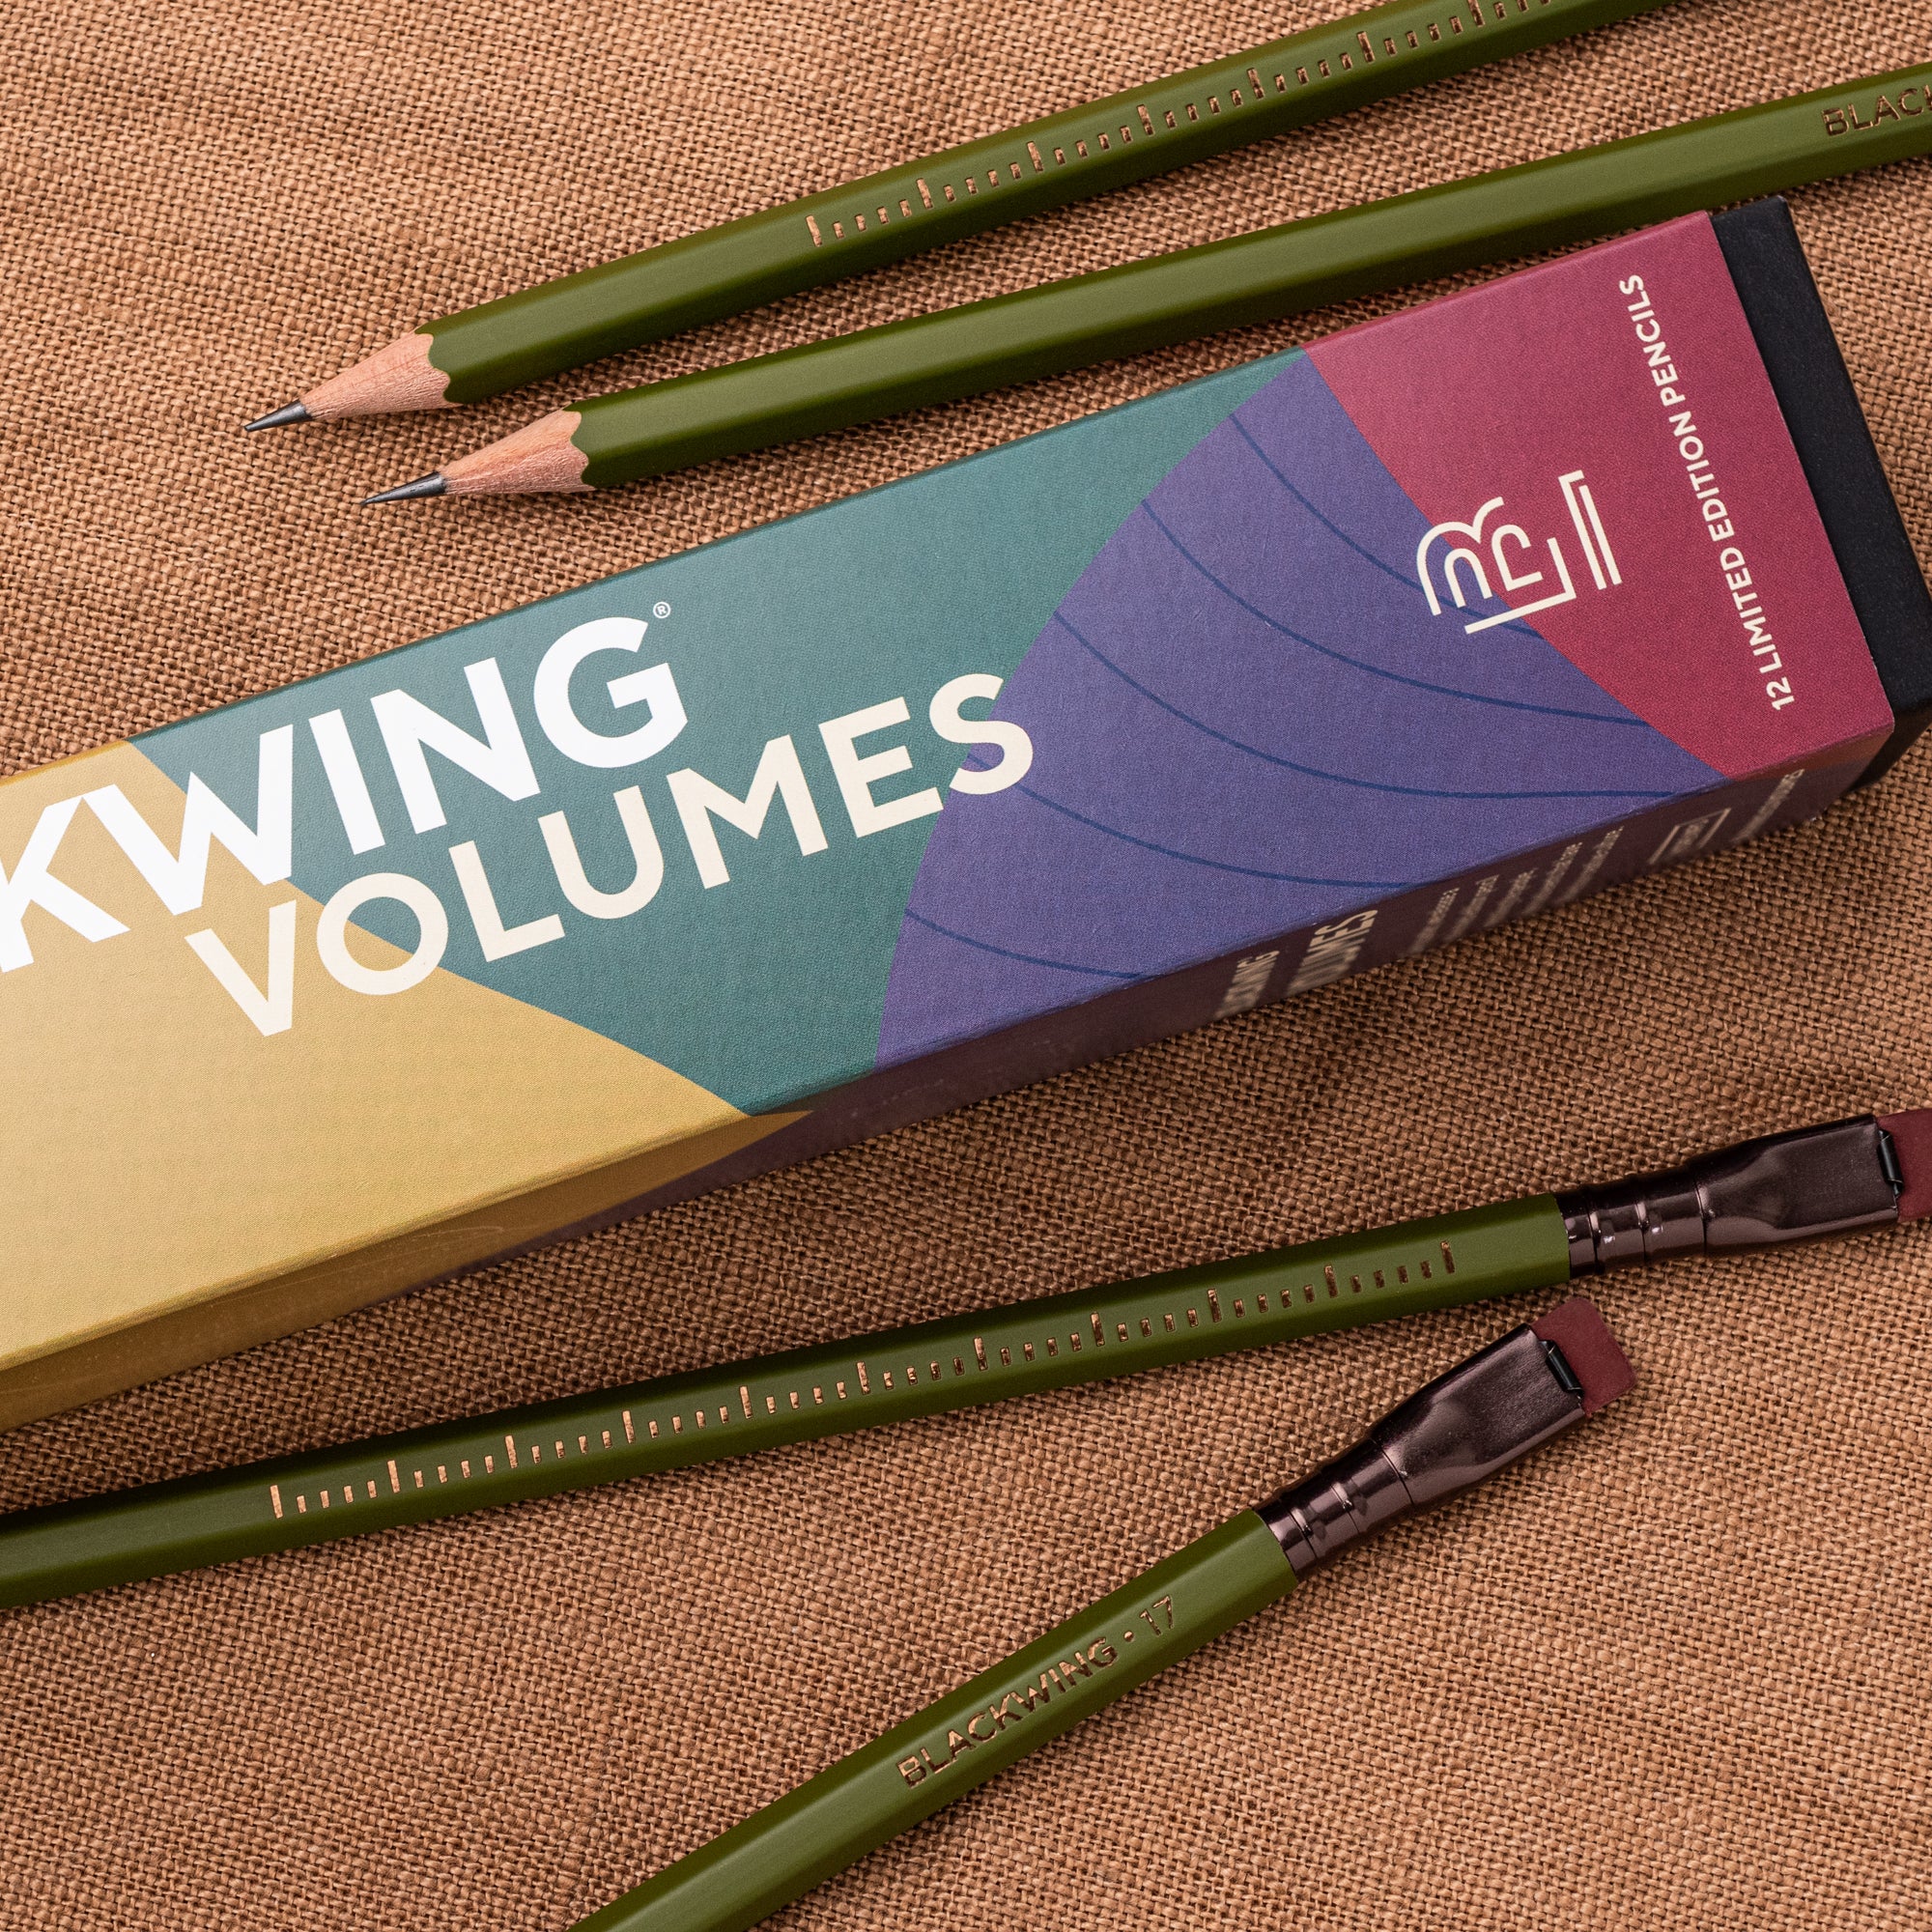 Wellspring-Colored Pencils with Sharpener